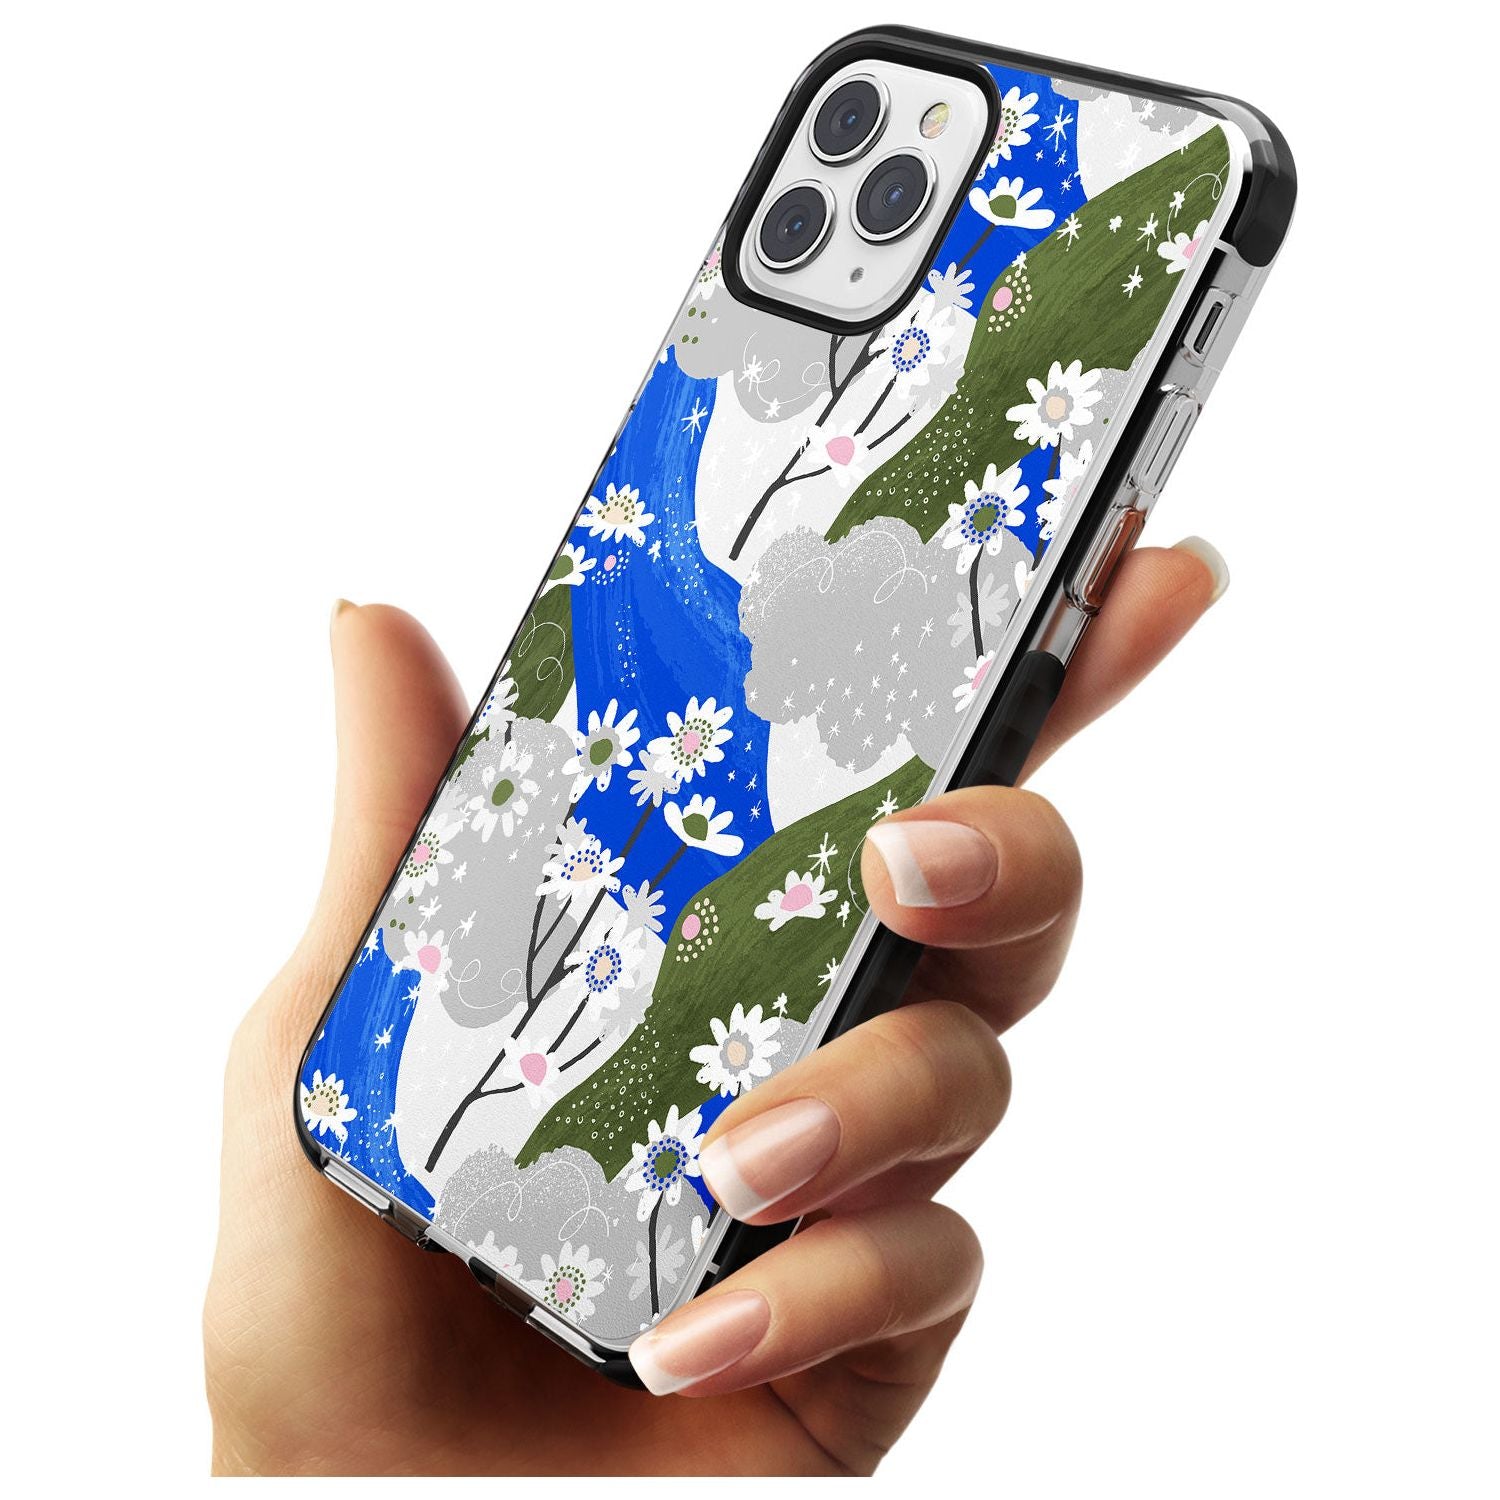 Blue & Grey Daisies Pattern iPhone Case   Phone Case - Case Warehouse